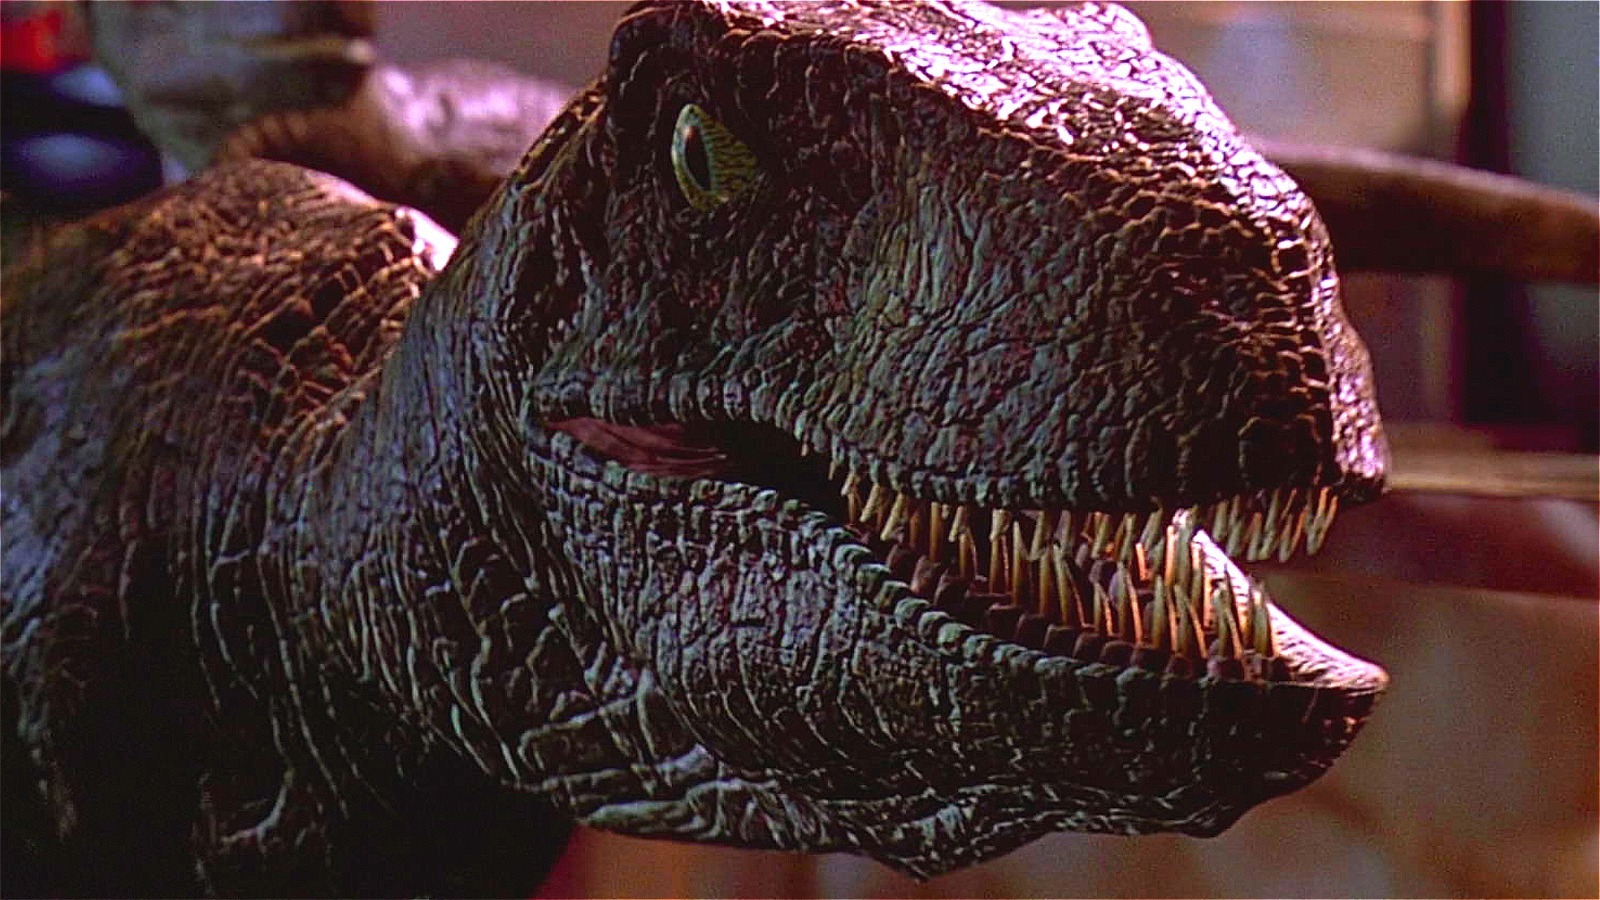 Jurassic Parks Velociraptors Are Completely Wrong According To Science 